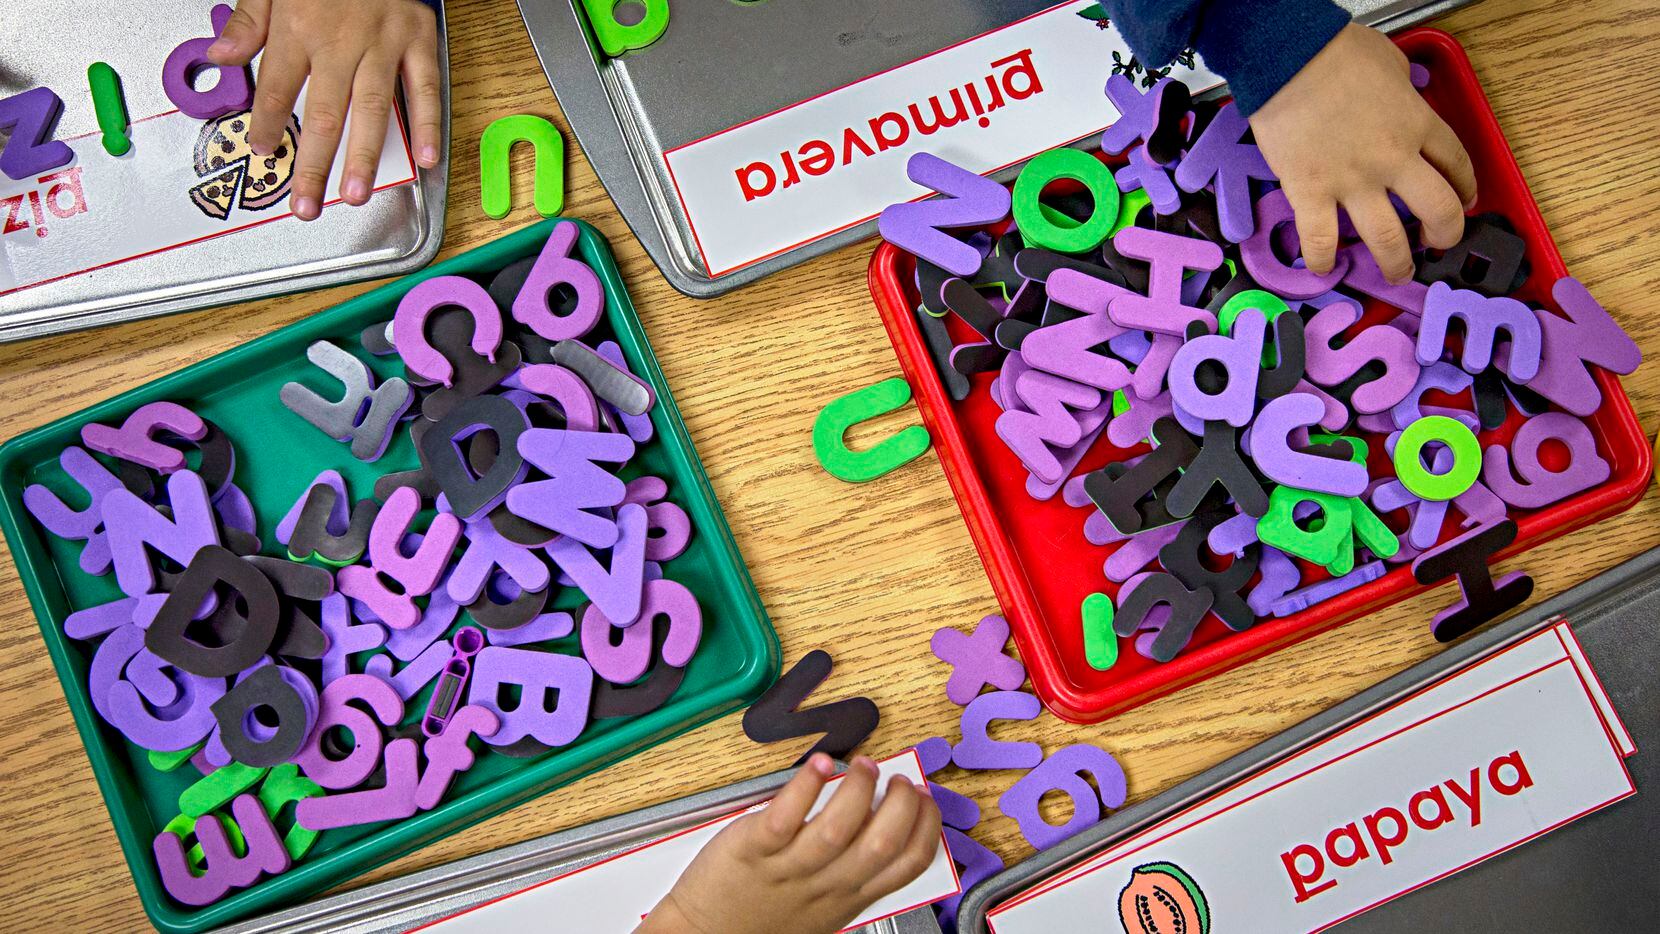 Prekindergarten students at Caillet Elementary School in northwest Dallas use letters to...